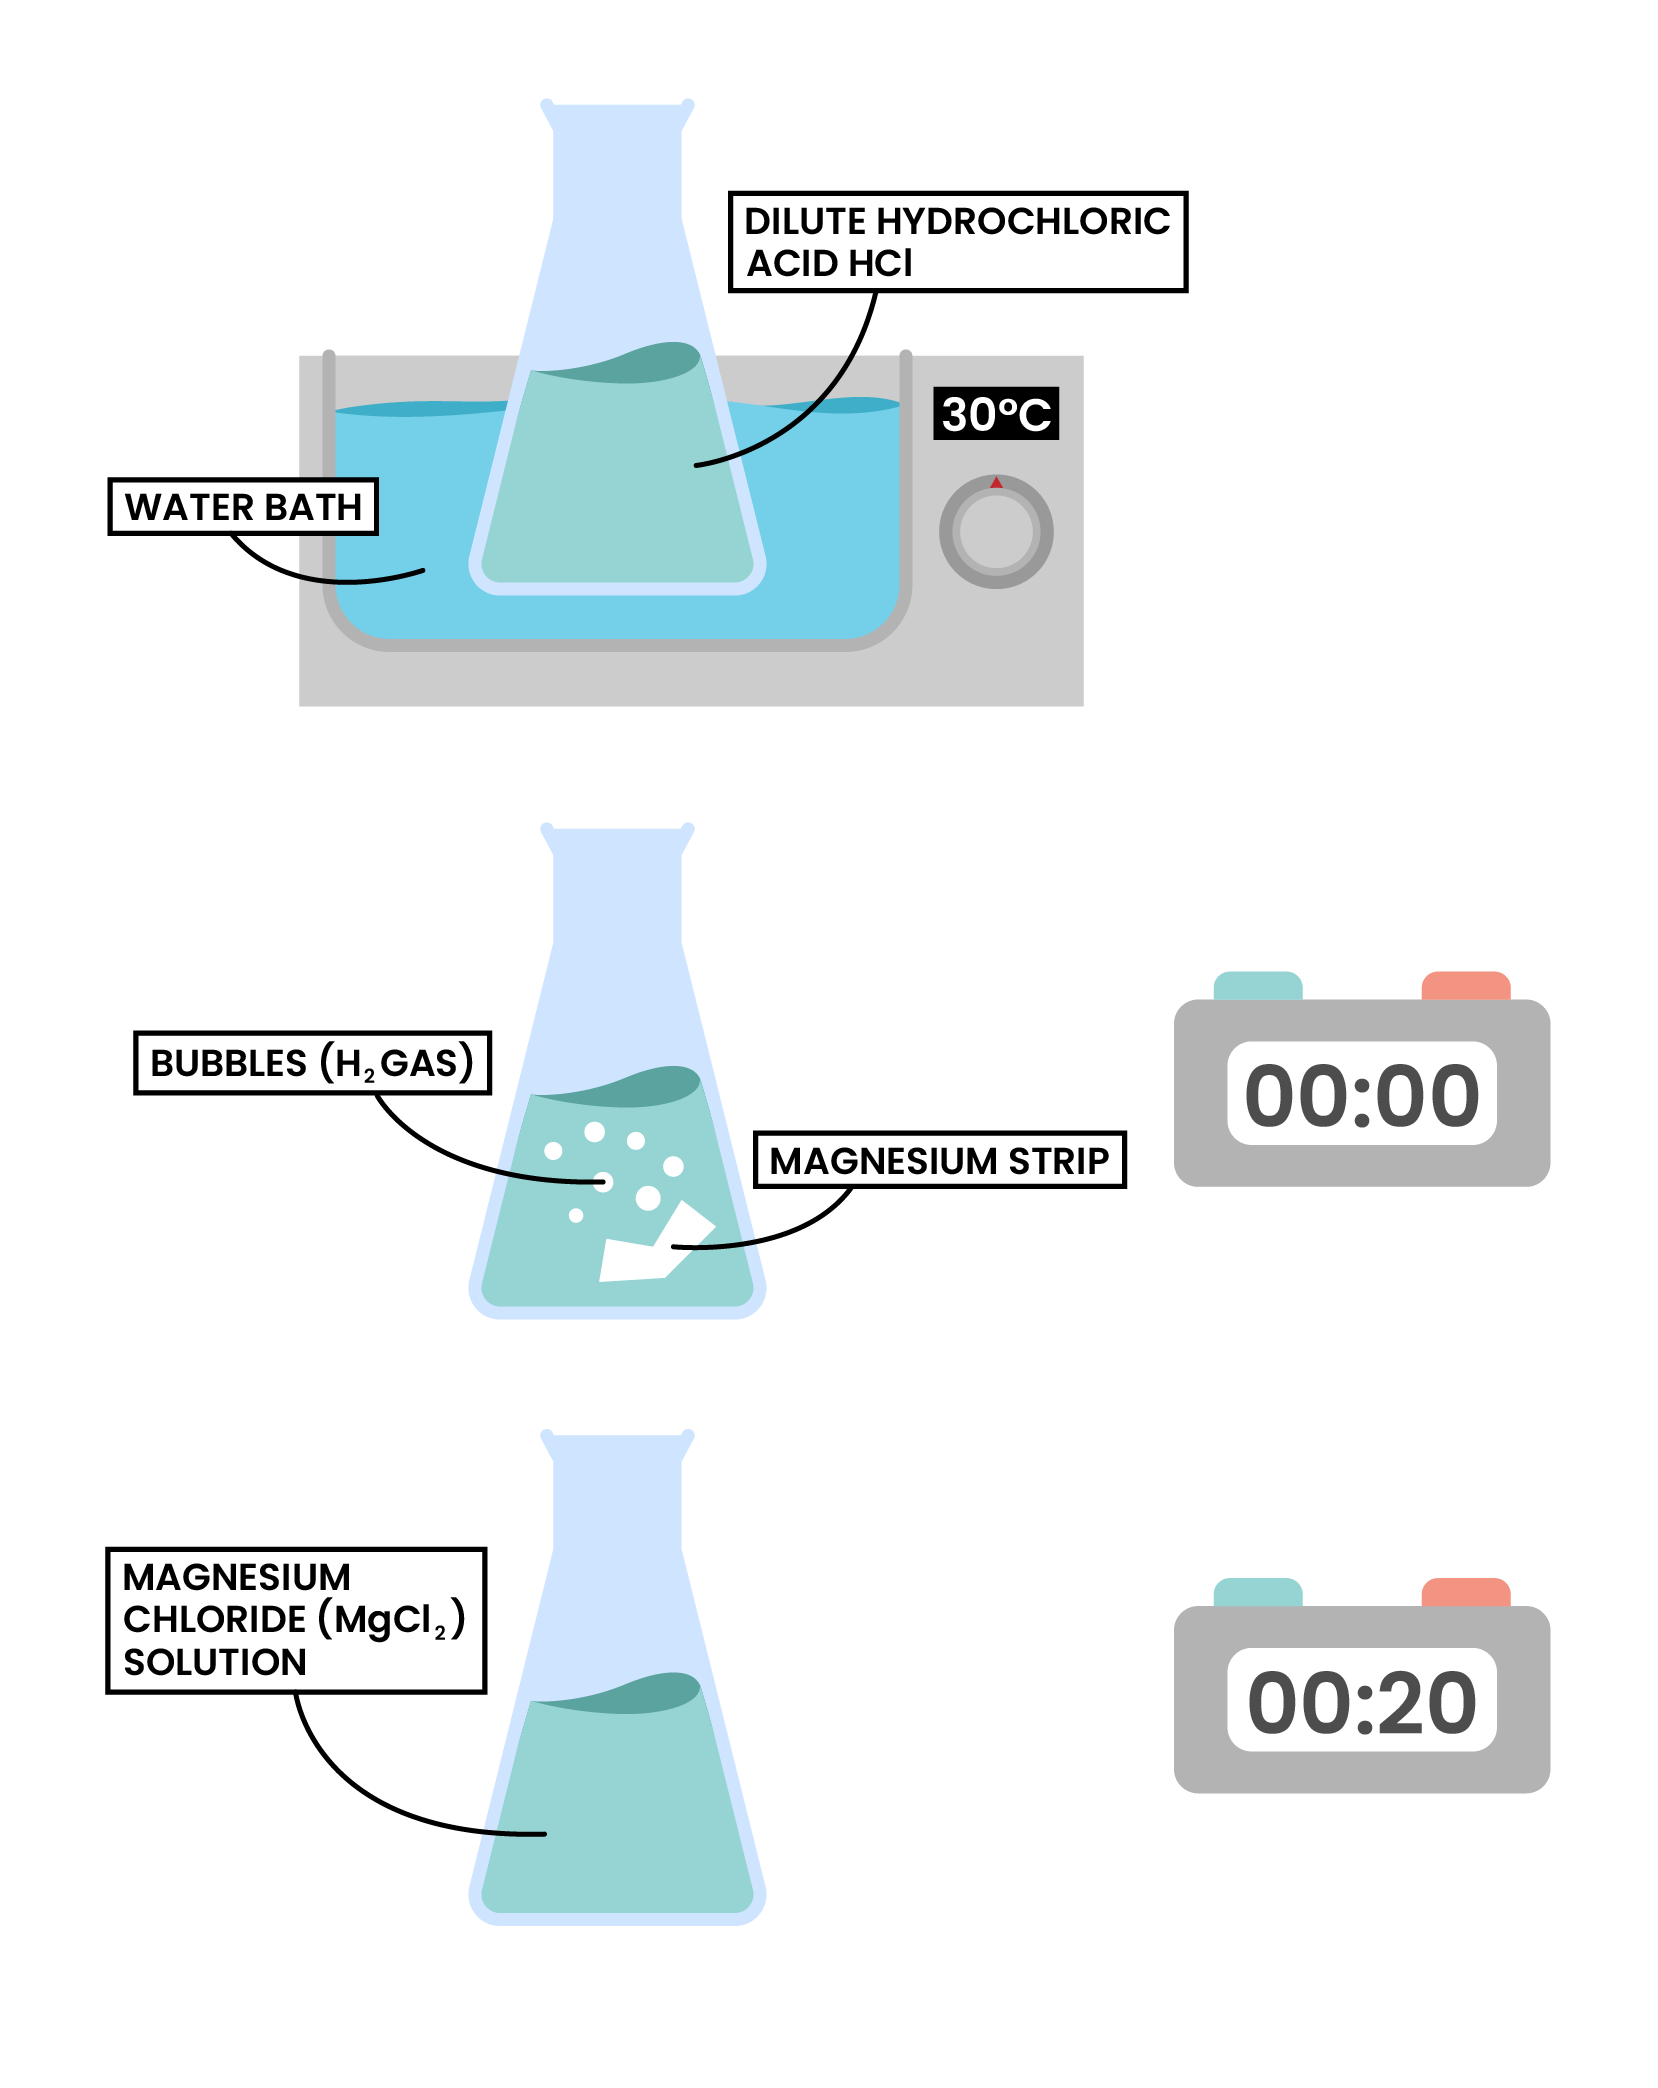 edexcel_igcse_chemistry_topic 19_rates of reaction_003_effect of temperature on rate of reaction experiment diagram